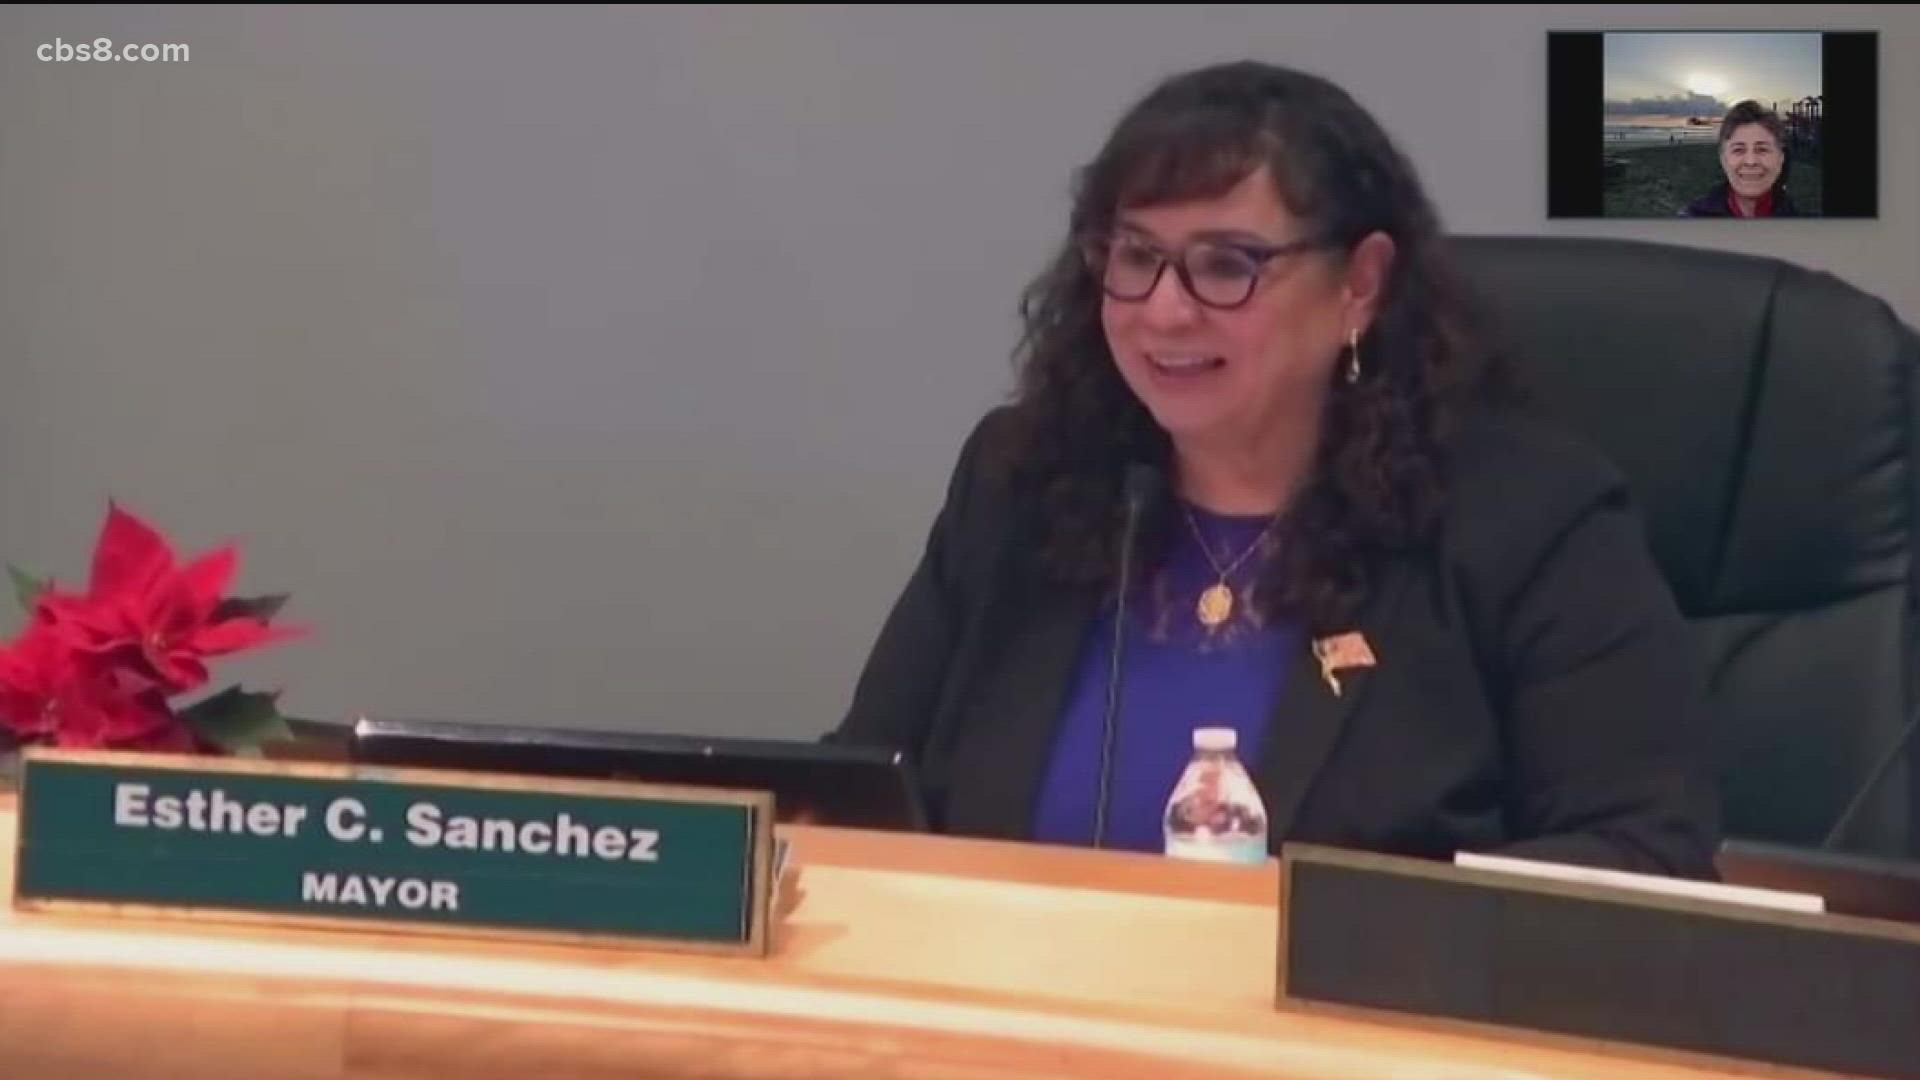 Mayor Esther Sanchez inherited the Mayor's Office amid the pandemic. She talks about the challenges, successes, and Oceanside's future.